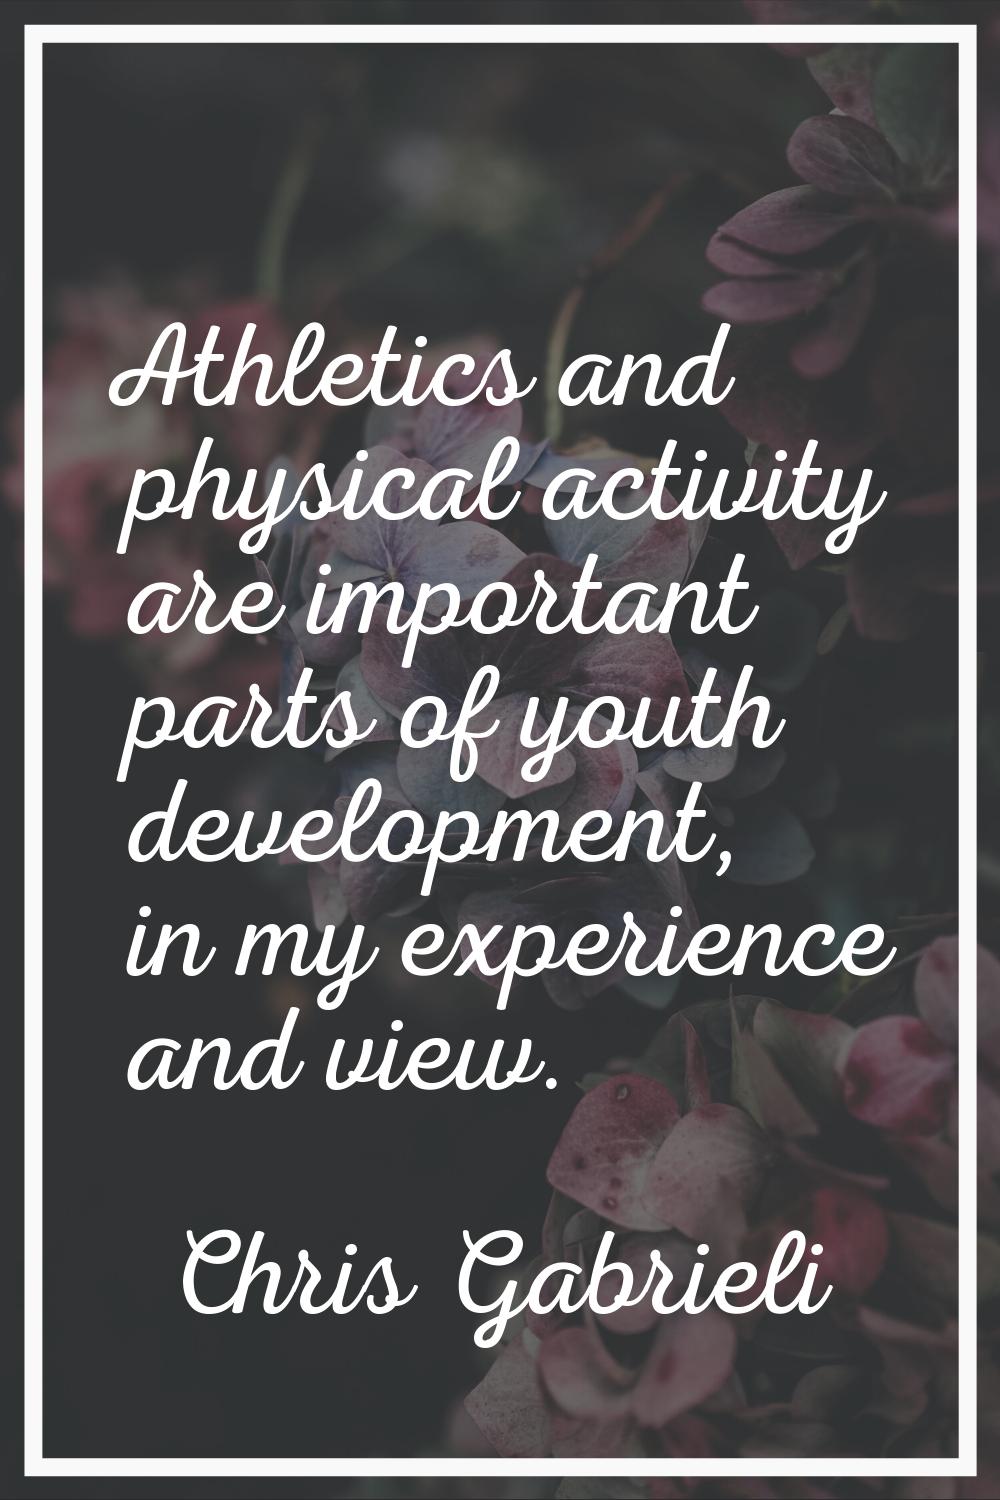 Athletics and physical activity are important parts of youth development, in my experience and view